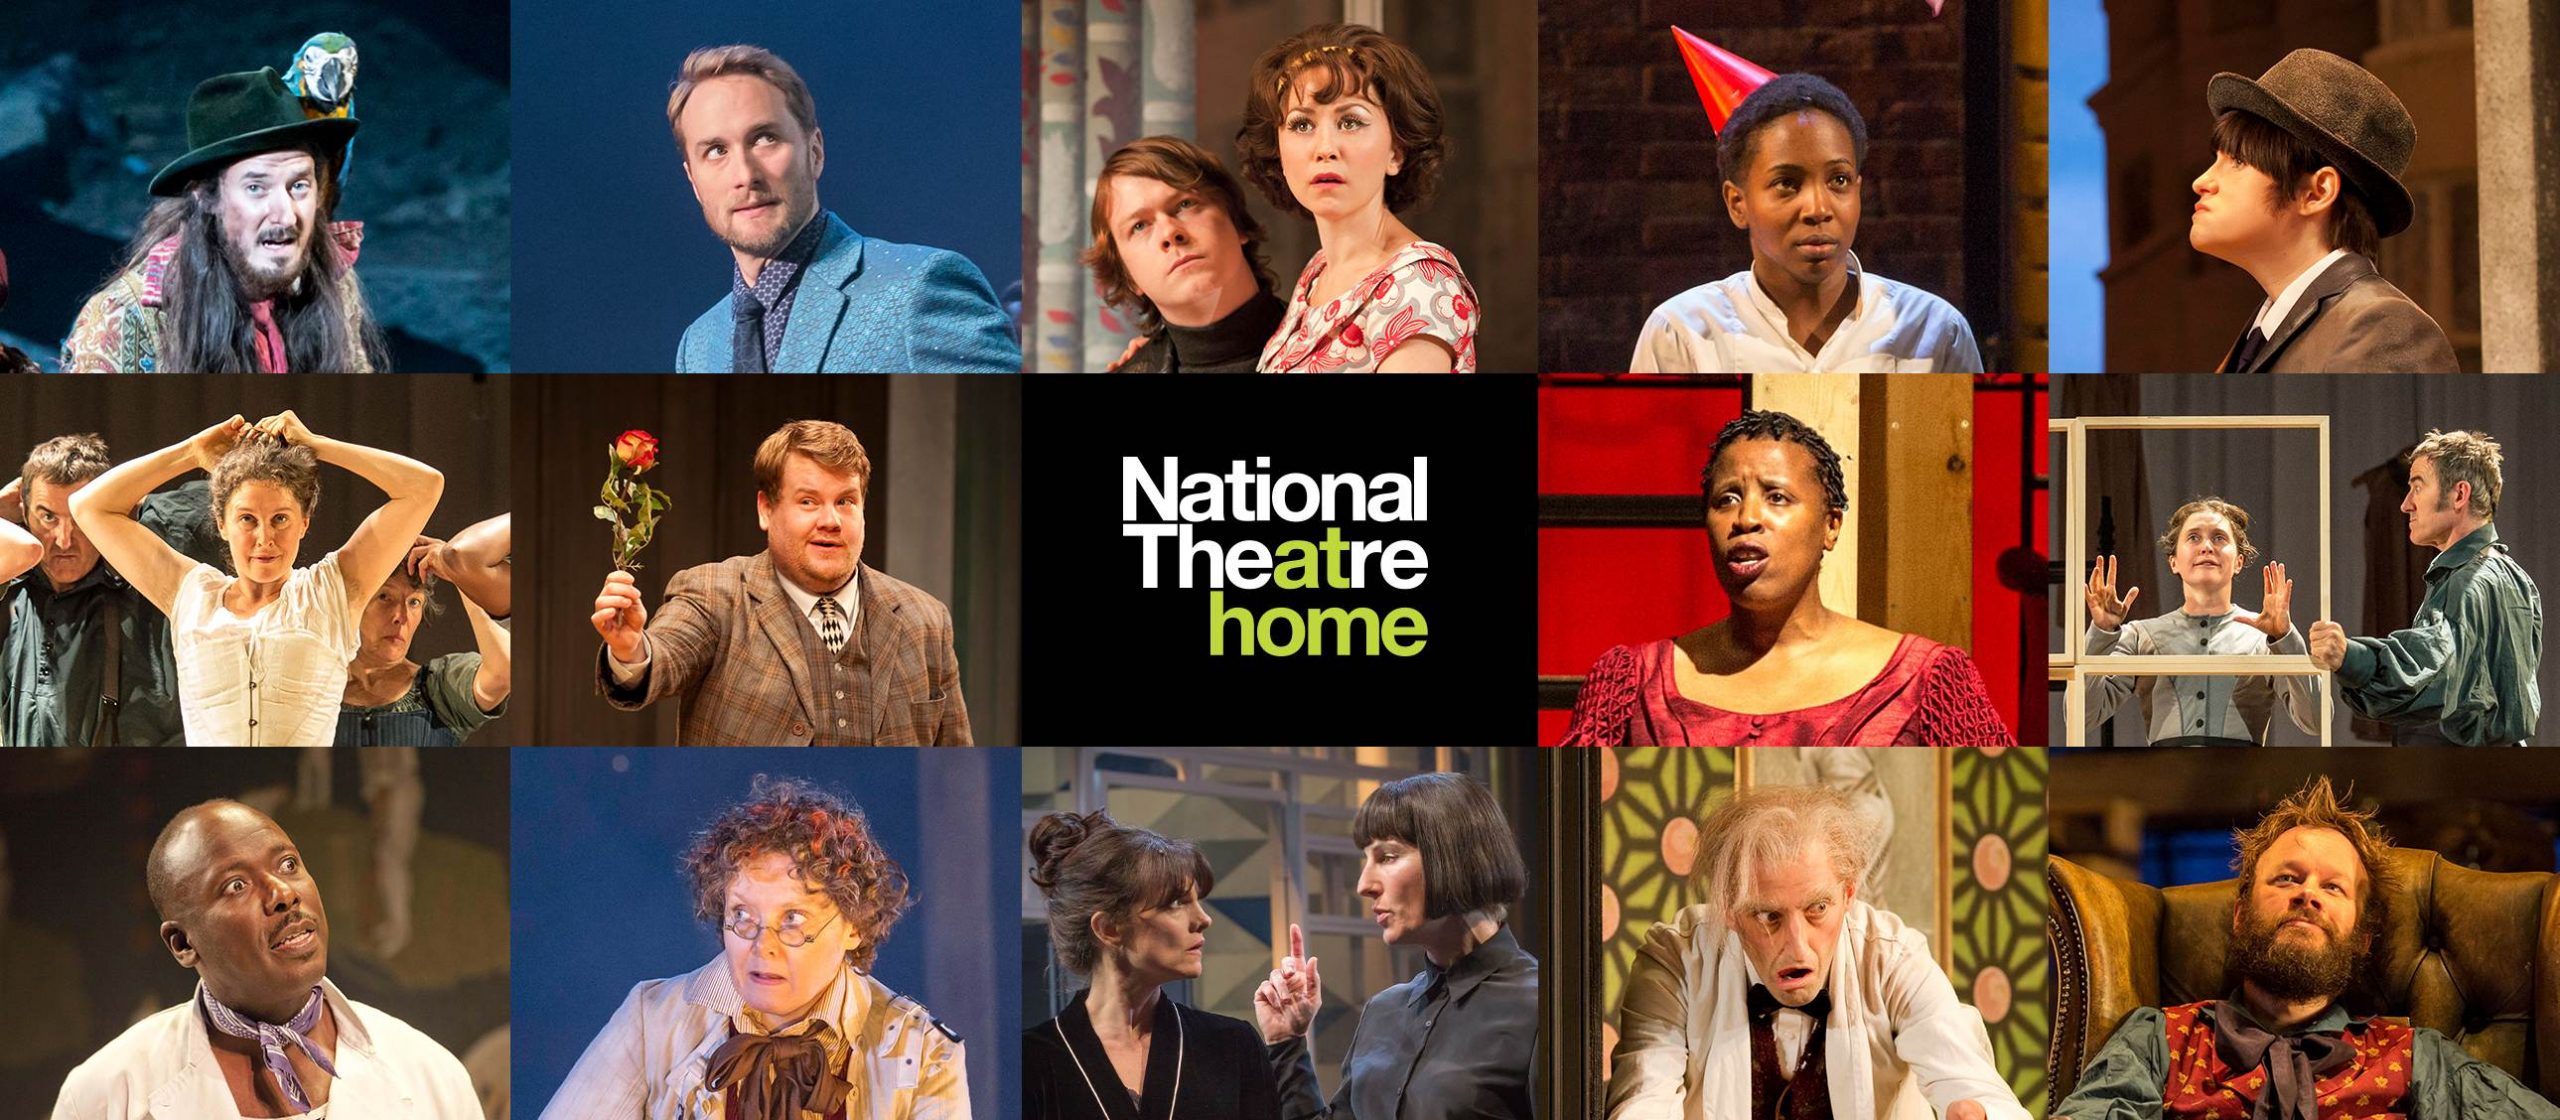 Enjoy National Theatre At Home With A New Show Every Week! Family Fun